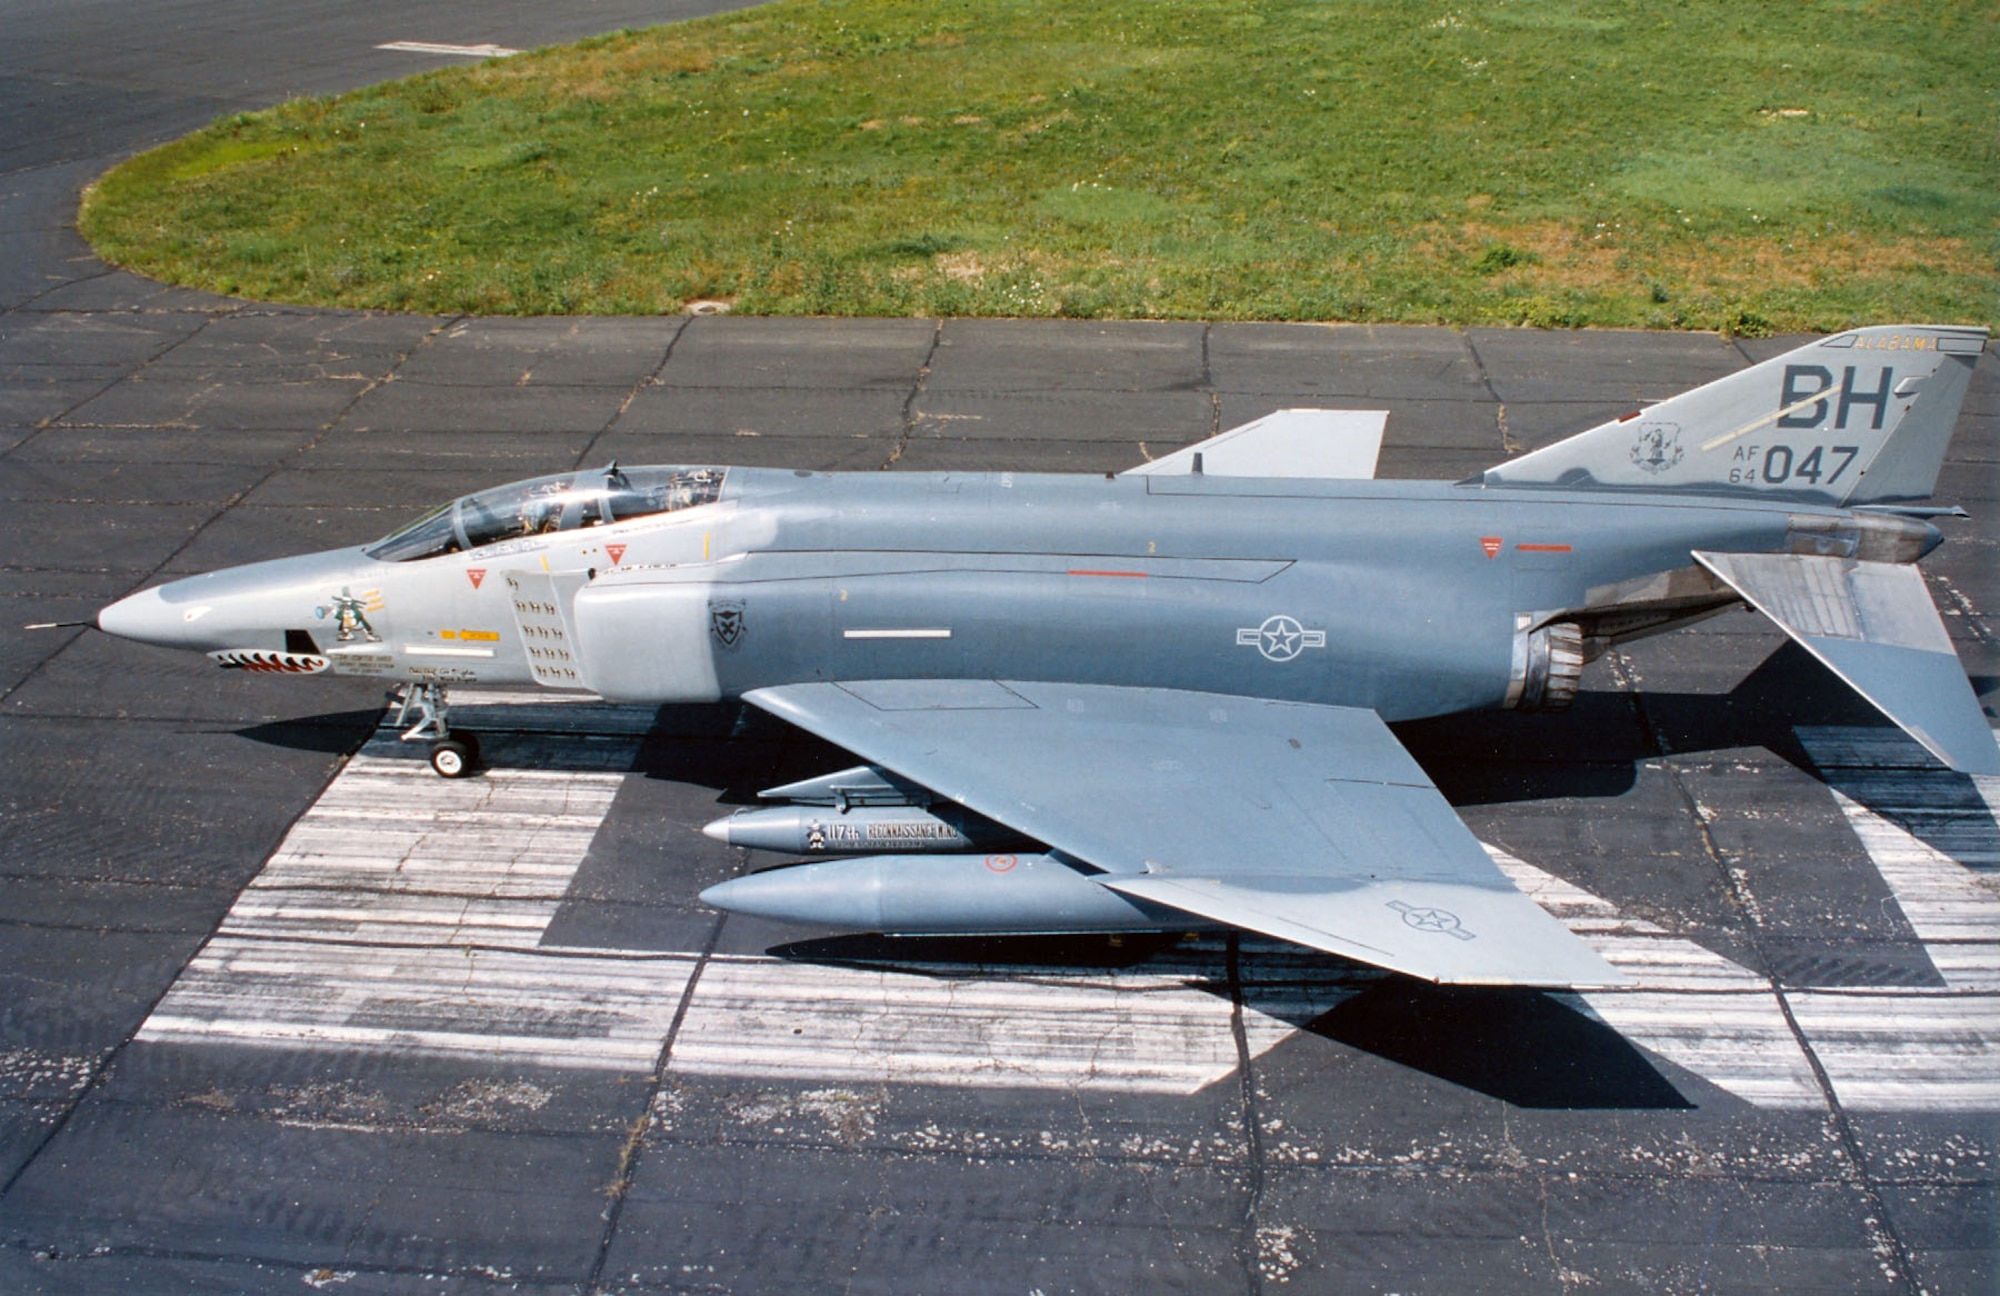 DAYTON, Ohio -- McDonnell Douglas RF-4C Phantom II at the National Museum of the United States Air Force. (U.S. Air Force photo)